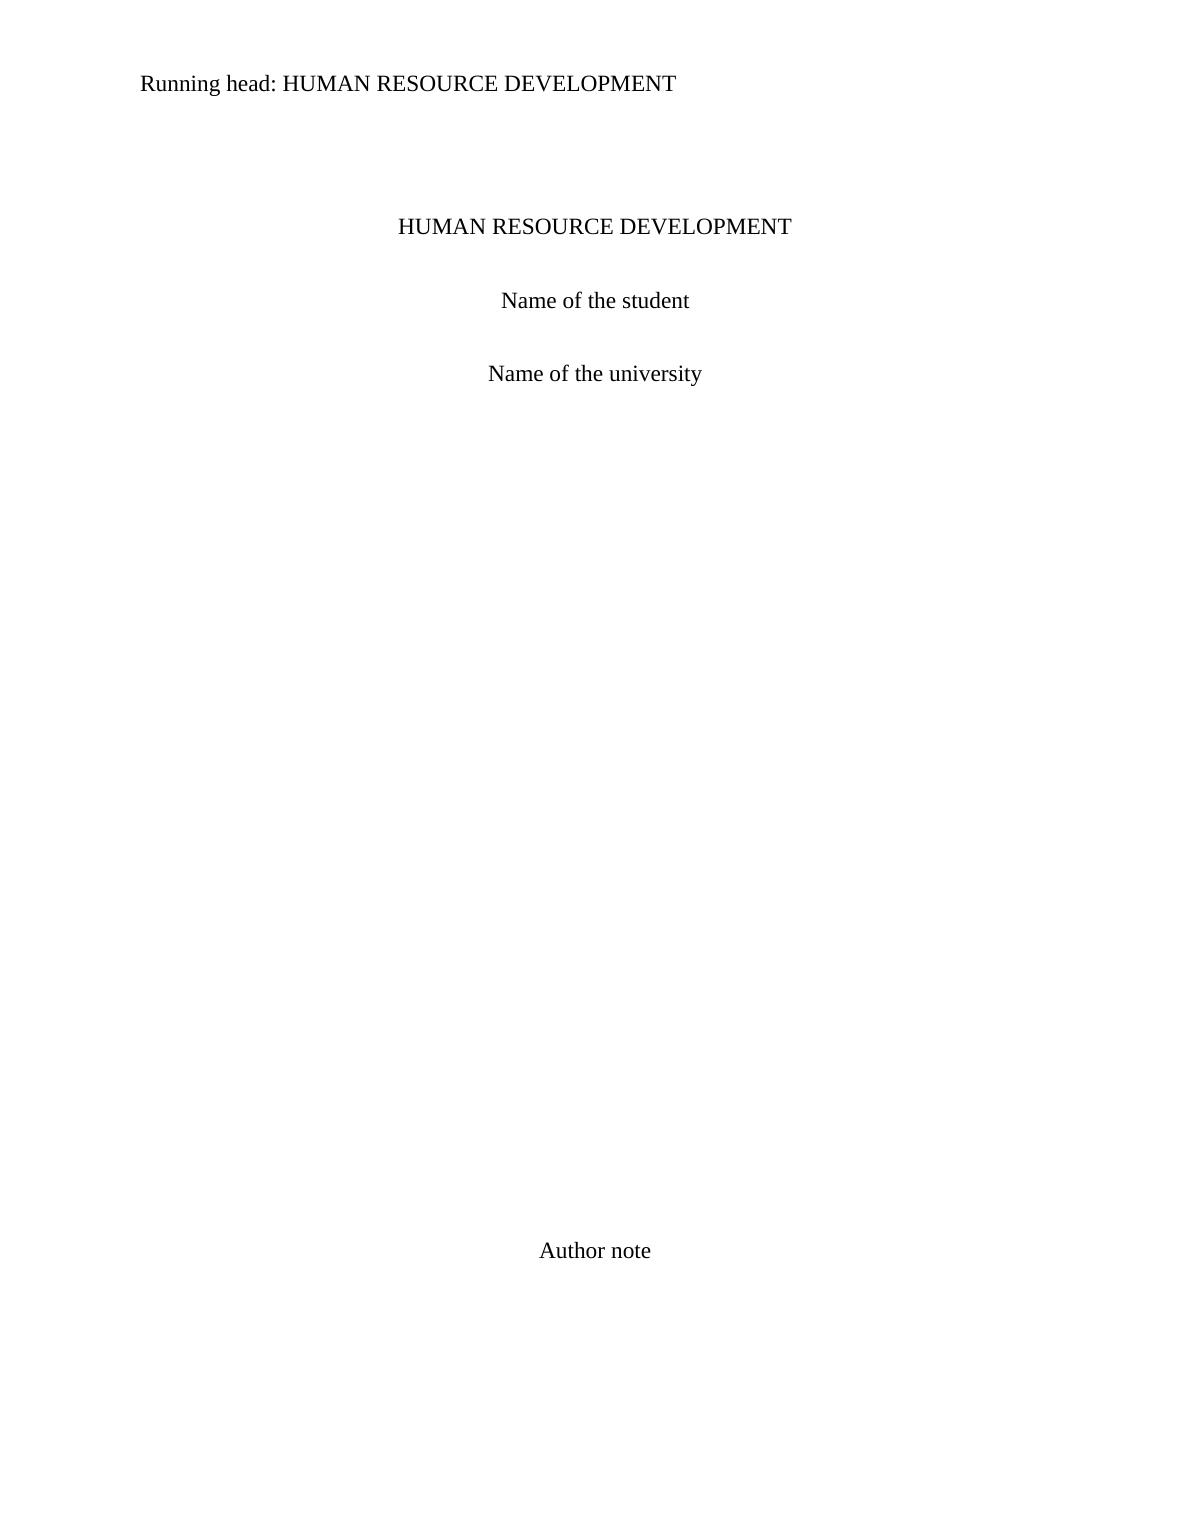 Report on Actions of Human Resource Development_1